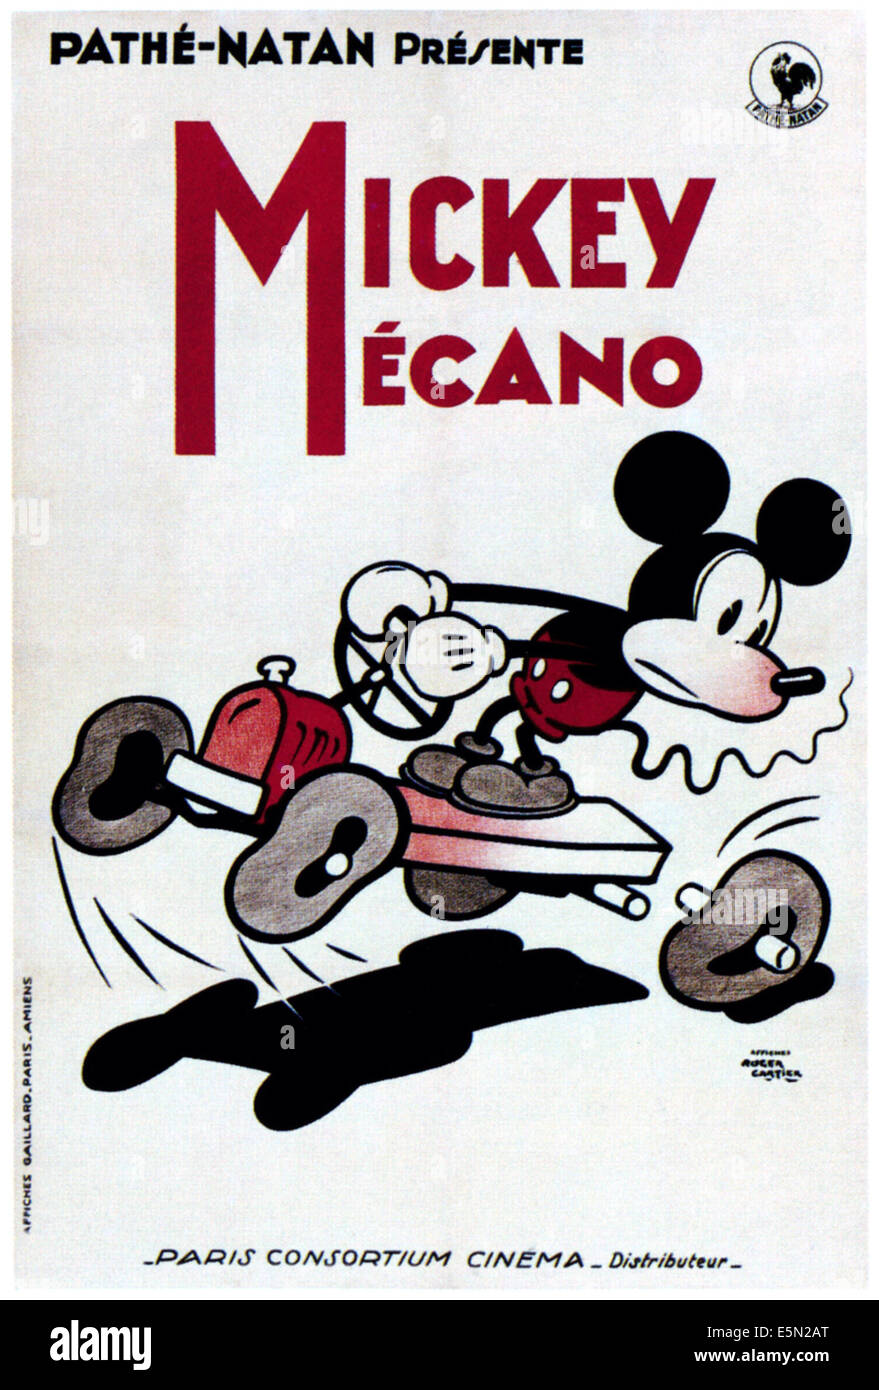 MICKEY MECANO, Mickey Mouse on French poster art, 1930 Stock Photo - Alamy